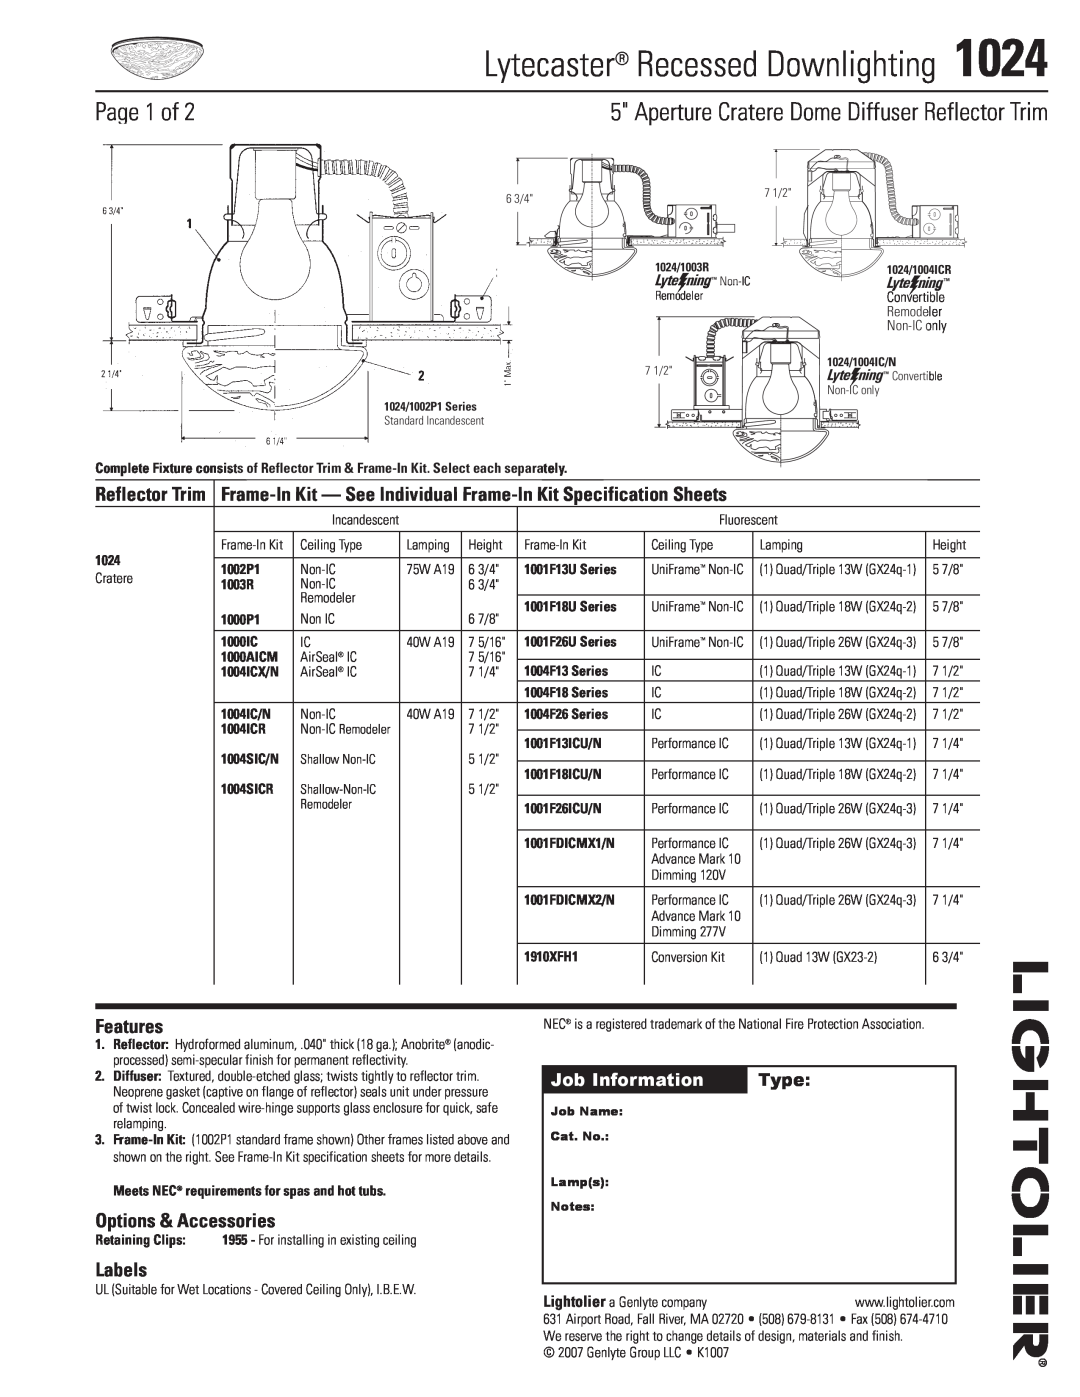 Lightolier 1024 specifications Page 1 of, Reflector Trim, Job Information, Type, Lytecaster Recessed Downlighting, Labels 